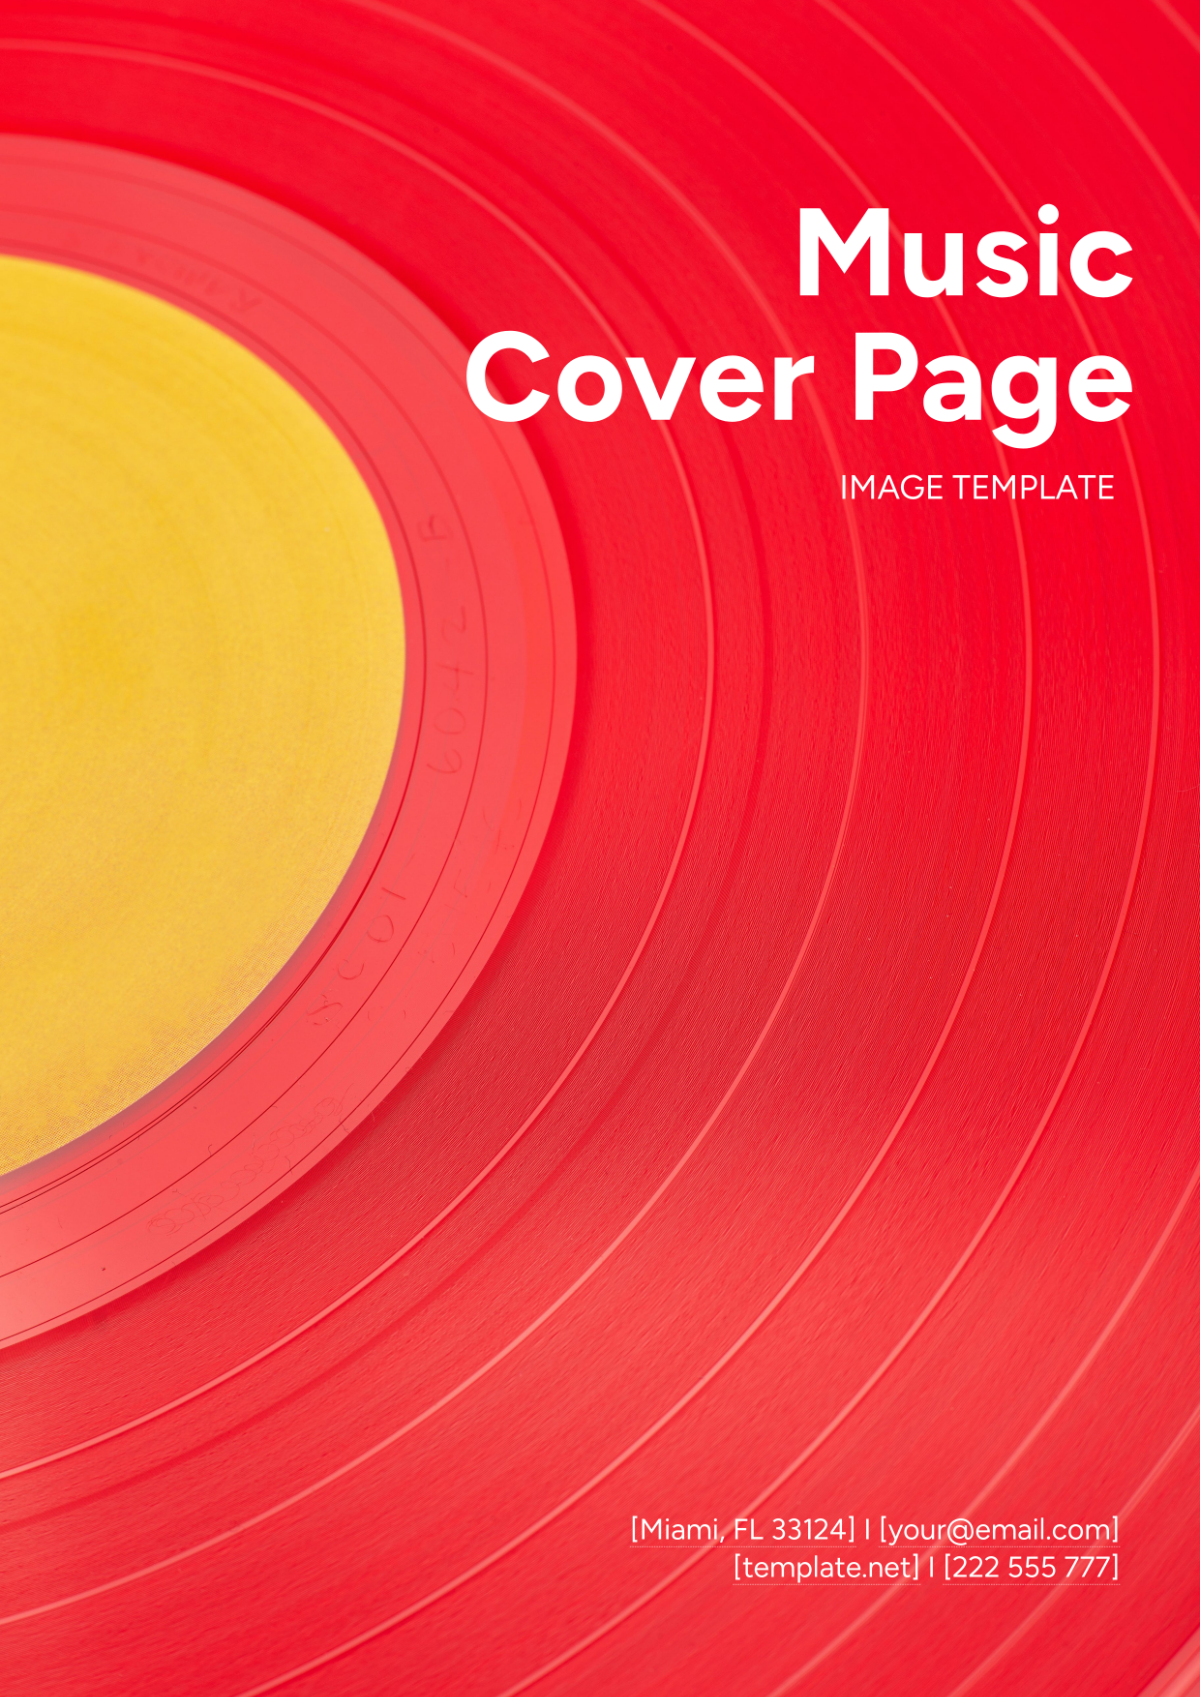 Music Cover Page Image Template